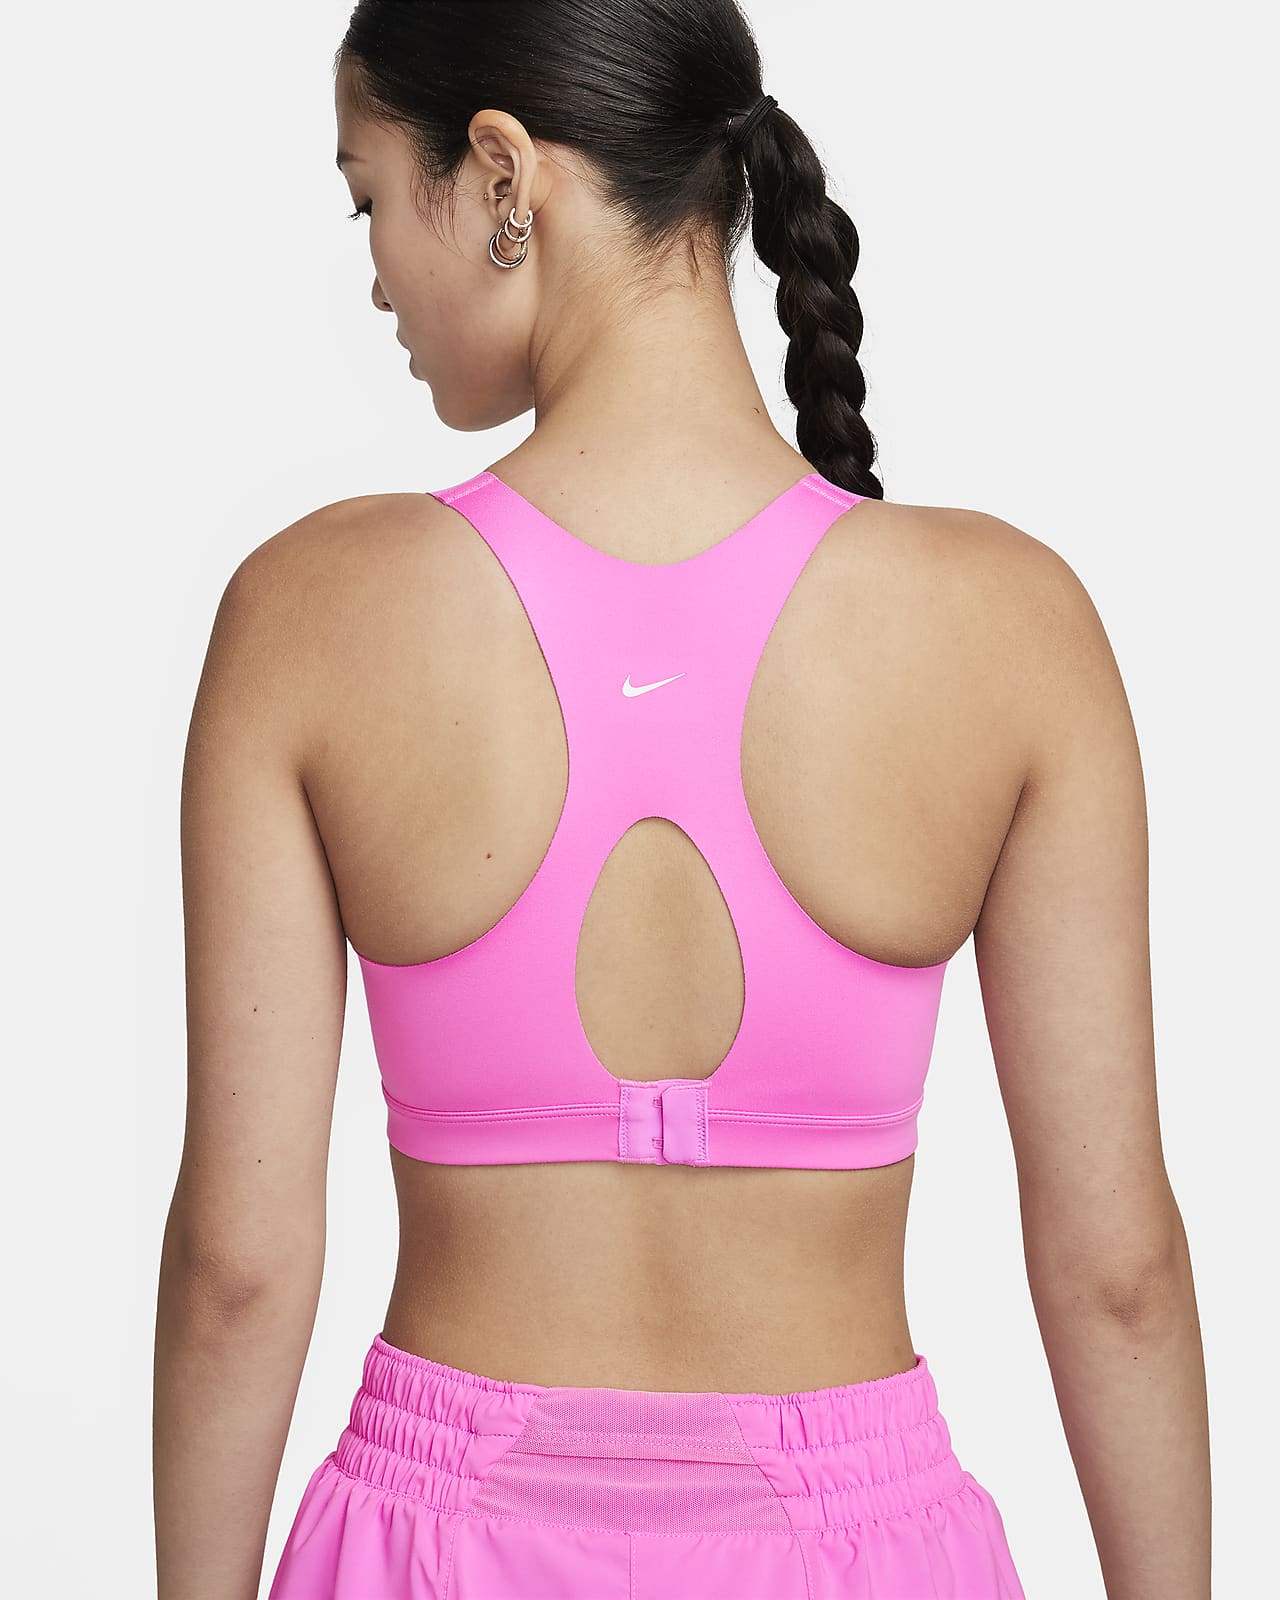 Nike Alpha Women's High-Support Padded Zip-Front Sports Bra. Nike RO